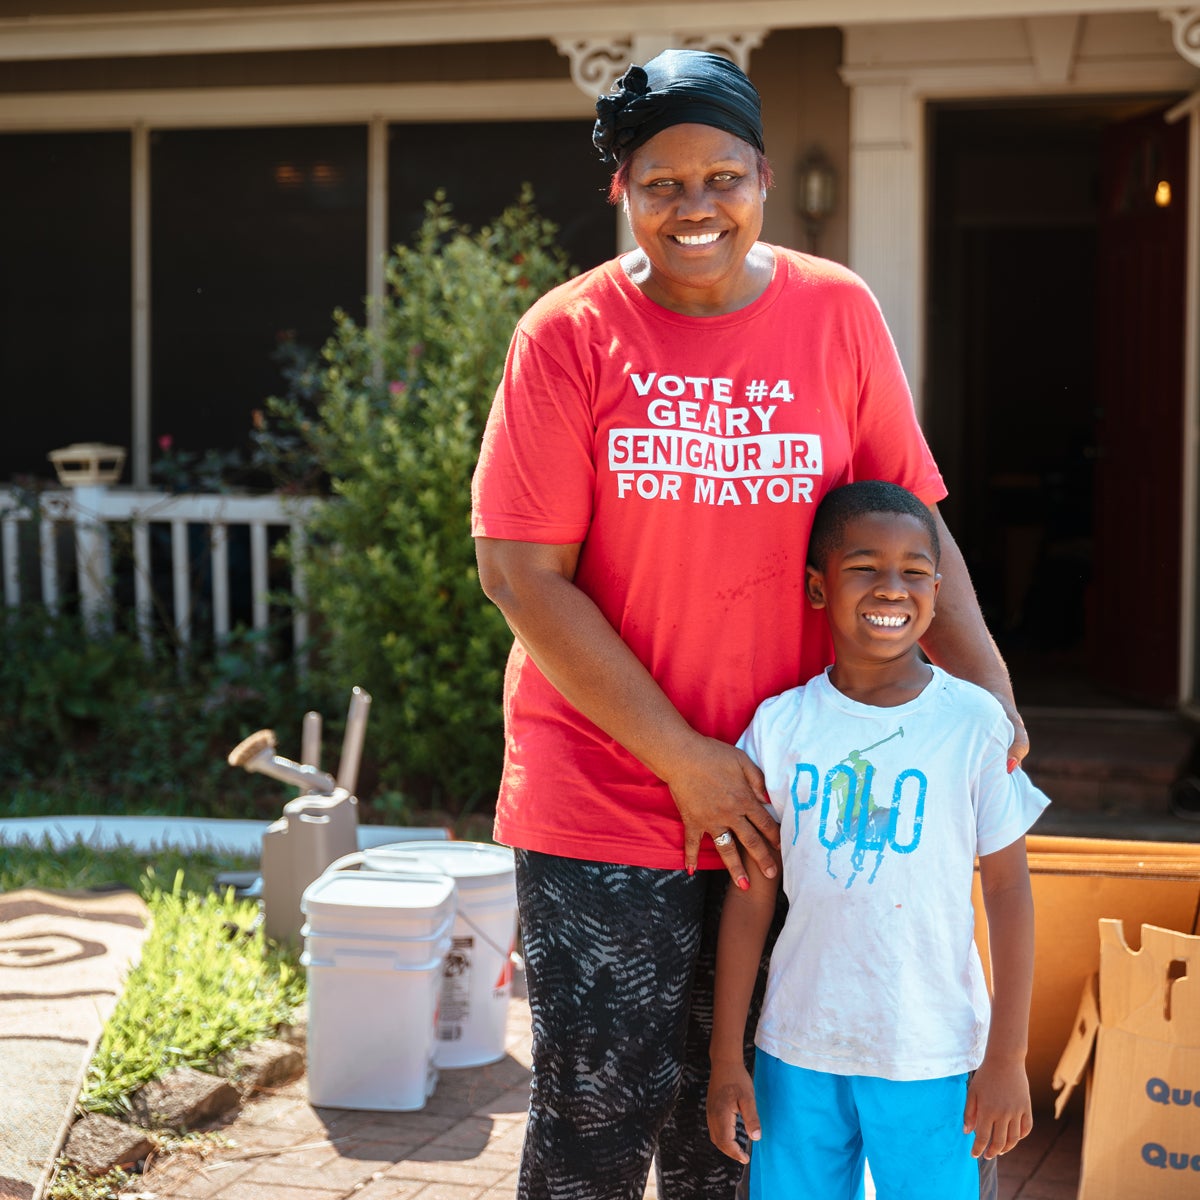 God was good to Debra and her grandson after Imelda flooded their home.